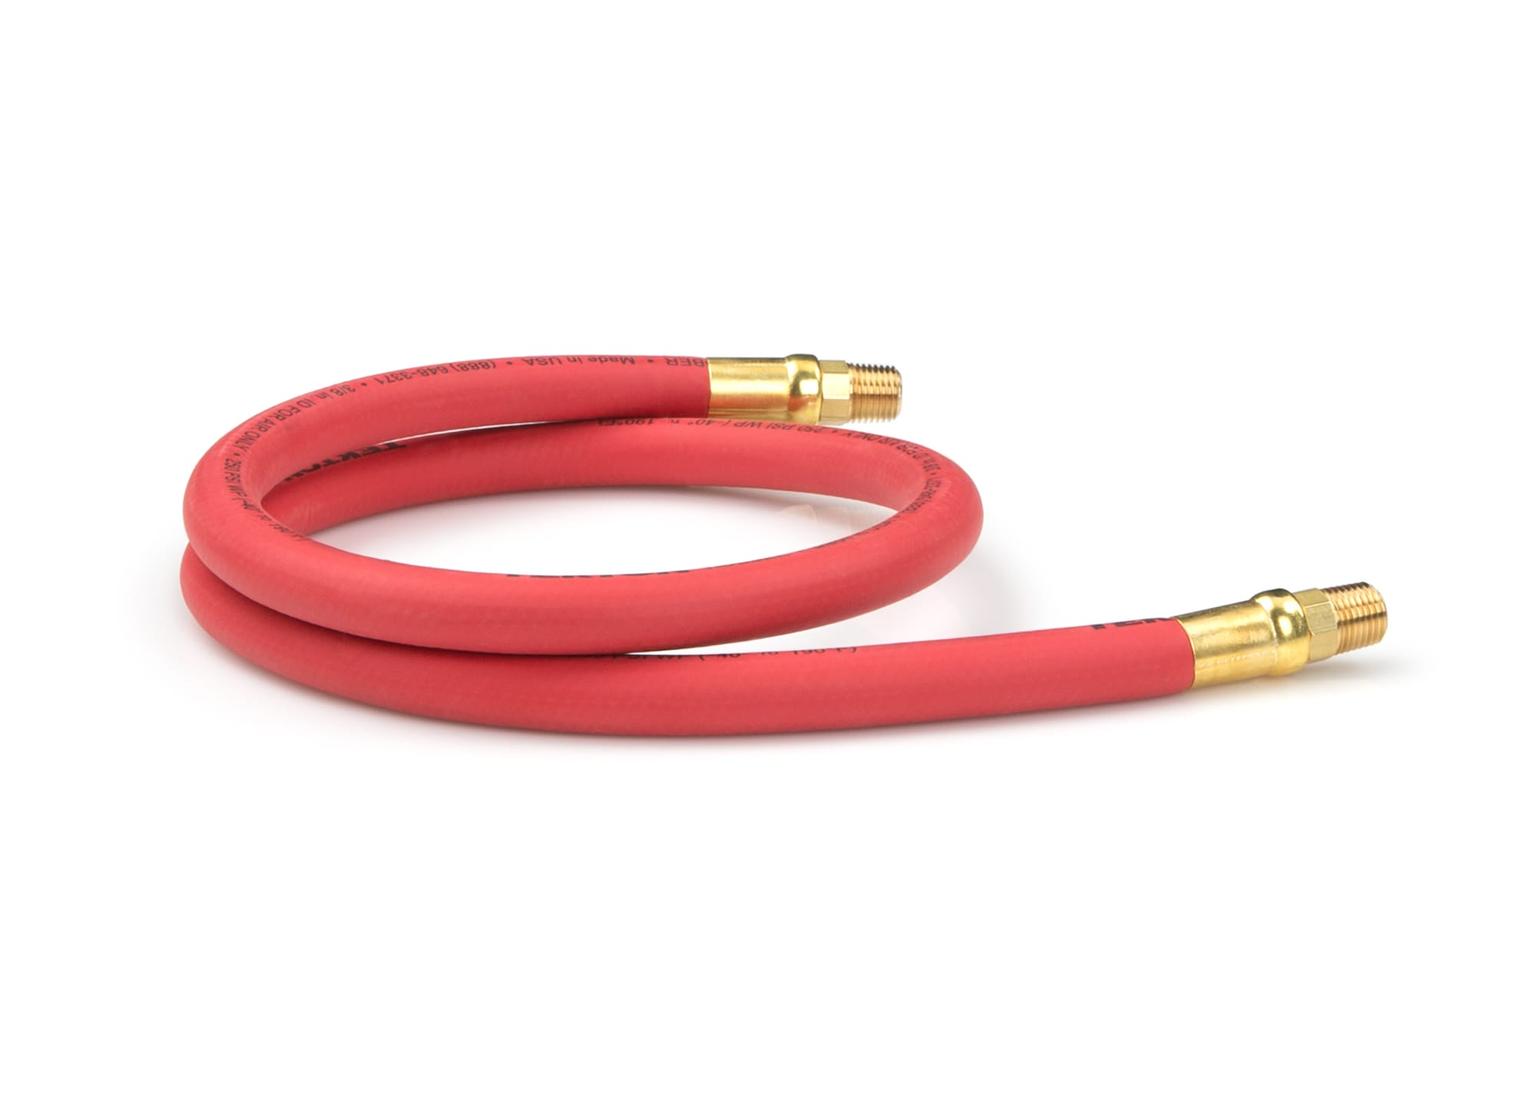 TEKTON 46332-S 3/8 Inch I.D. x 3 Foot Rubber Lead-In Air Hose (250 PSI)